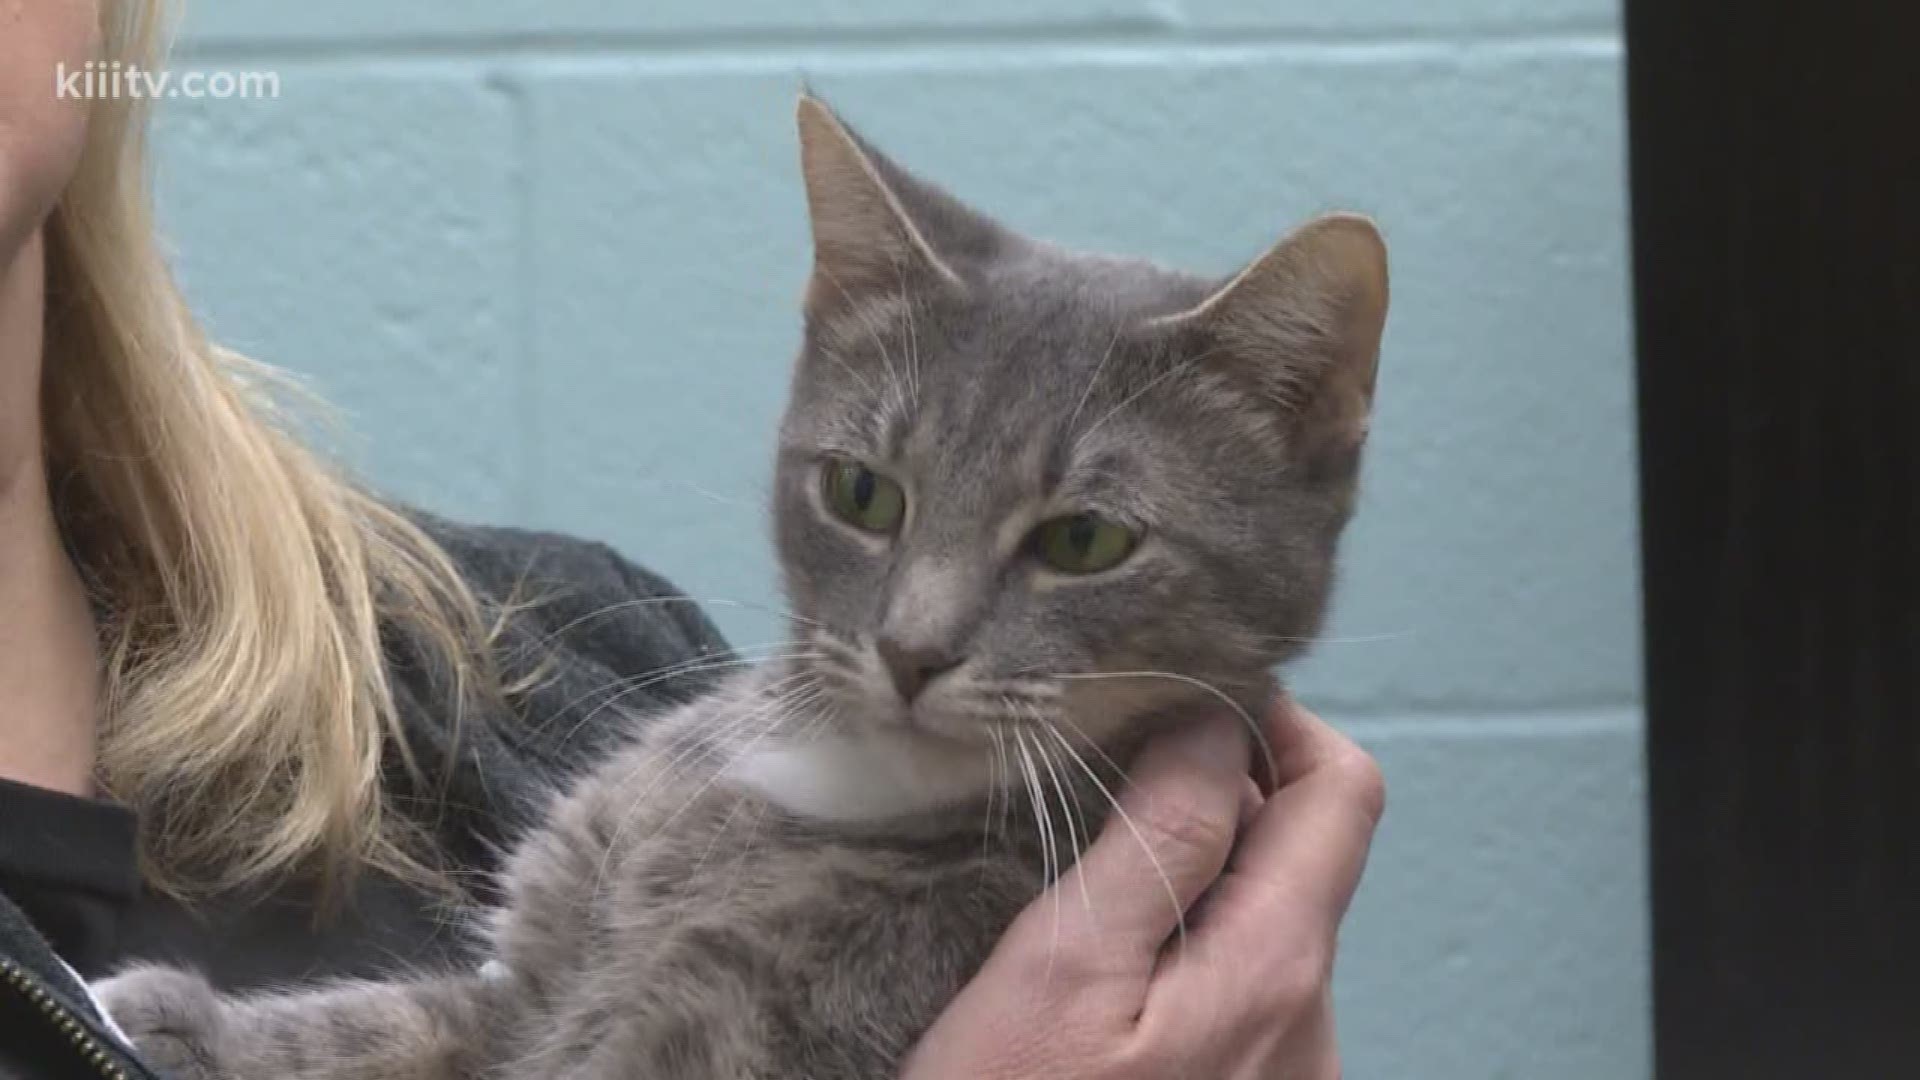 This Saturday's Pet is Tutti from the Gulf Coast Humane Society. She is just a little over a year old, and does not get along with other cats. If you would like more information on how to take her home, contact the GCHS for more information.